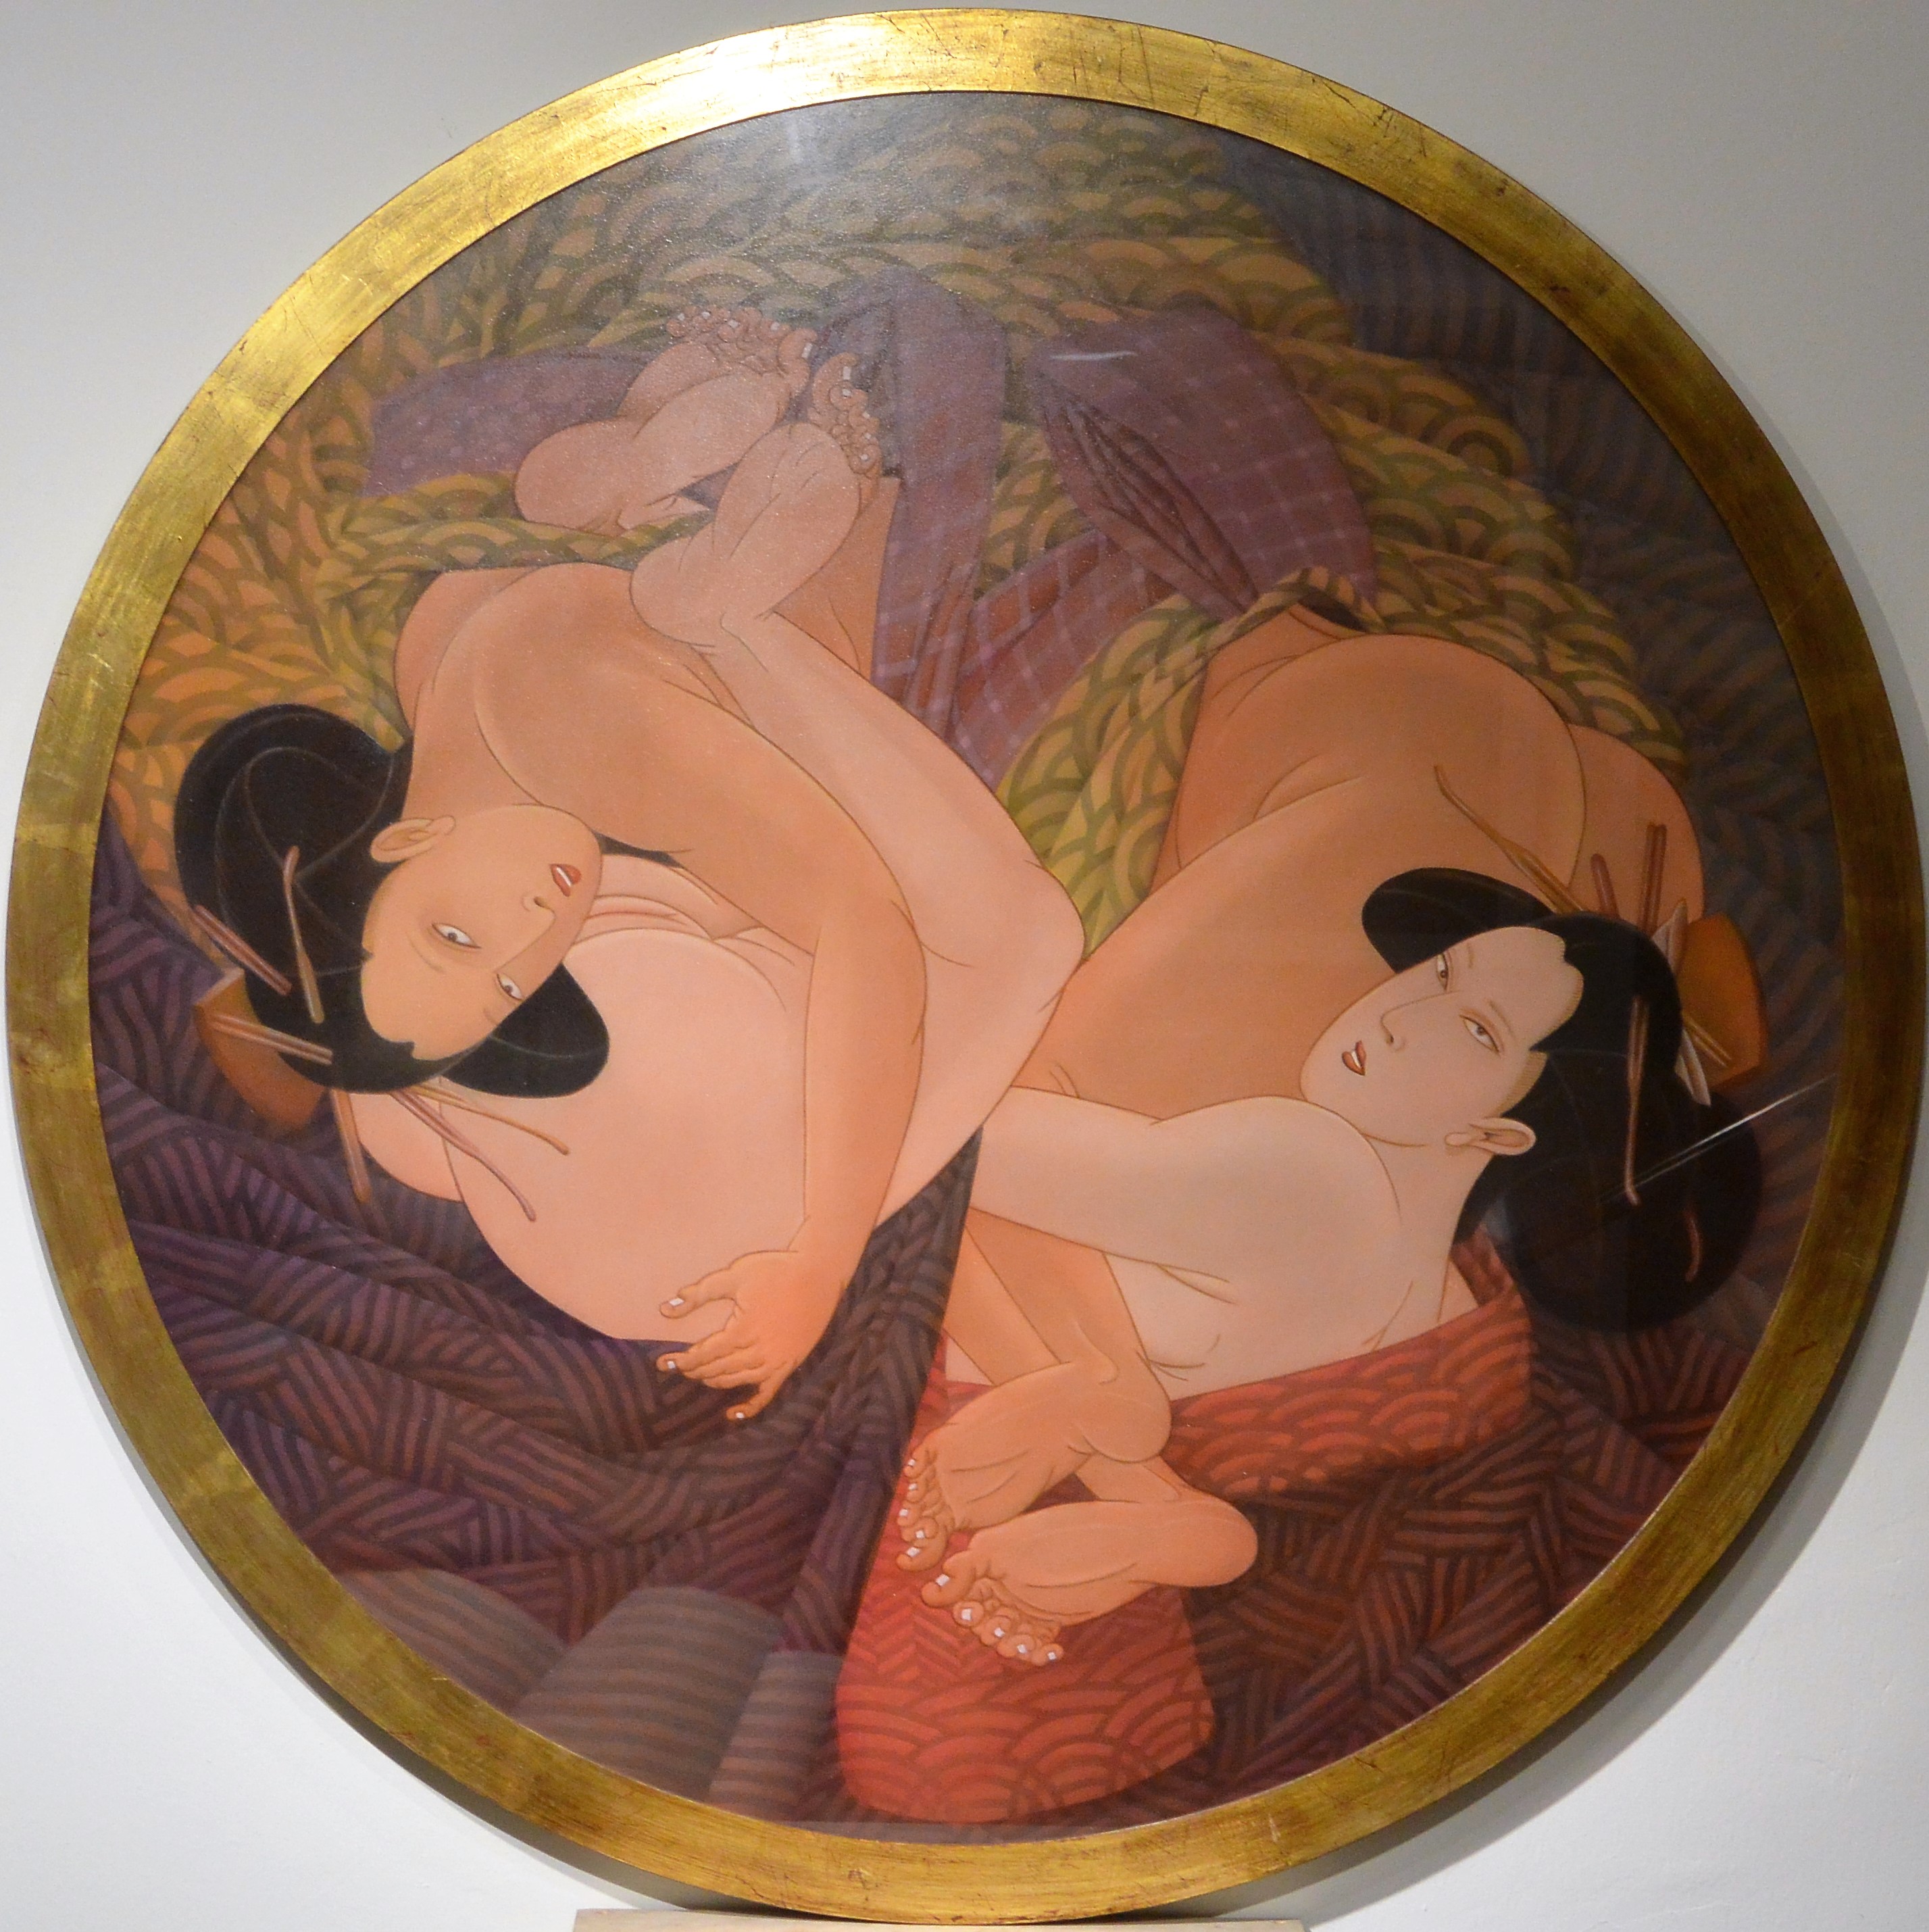 shunga plate portrayinga a lesbian couple in the 69 pose by fernando bellver